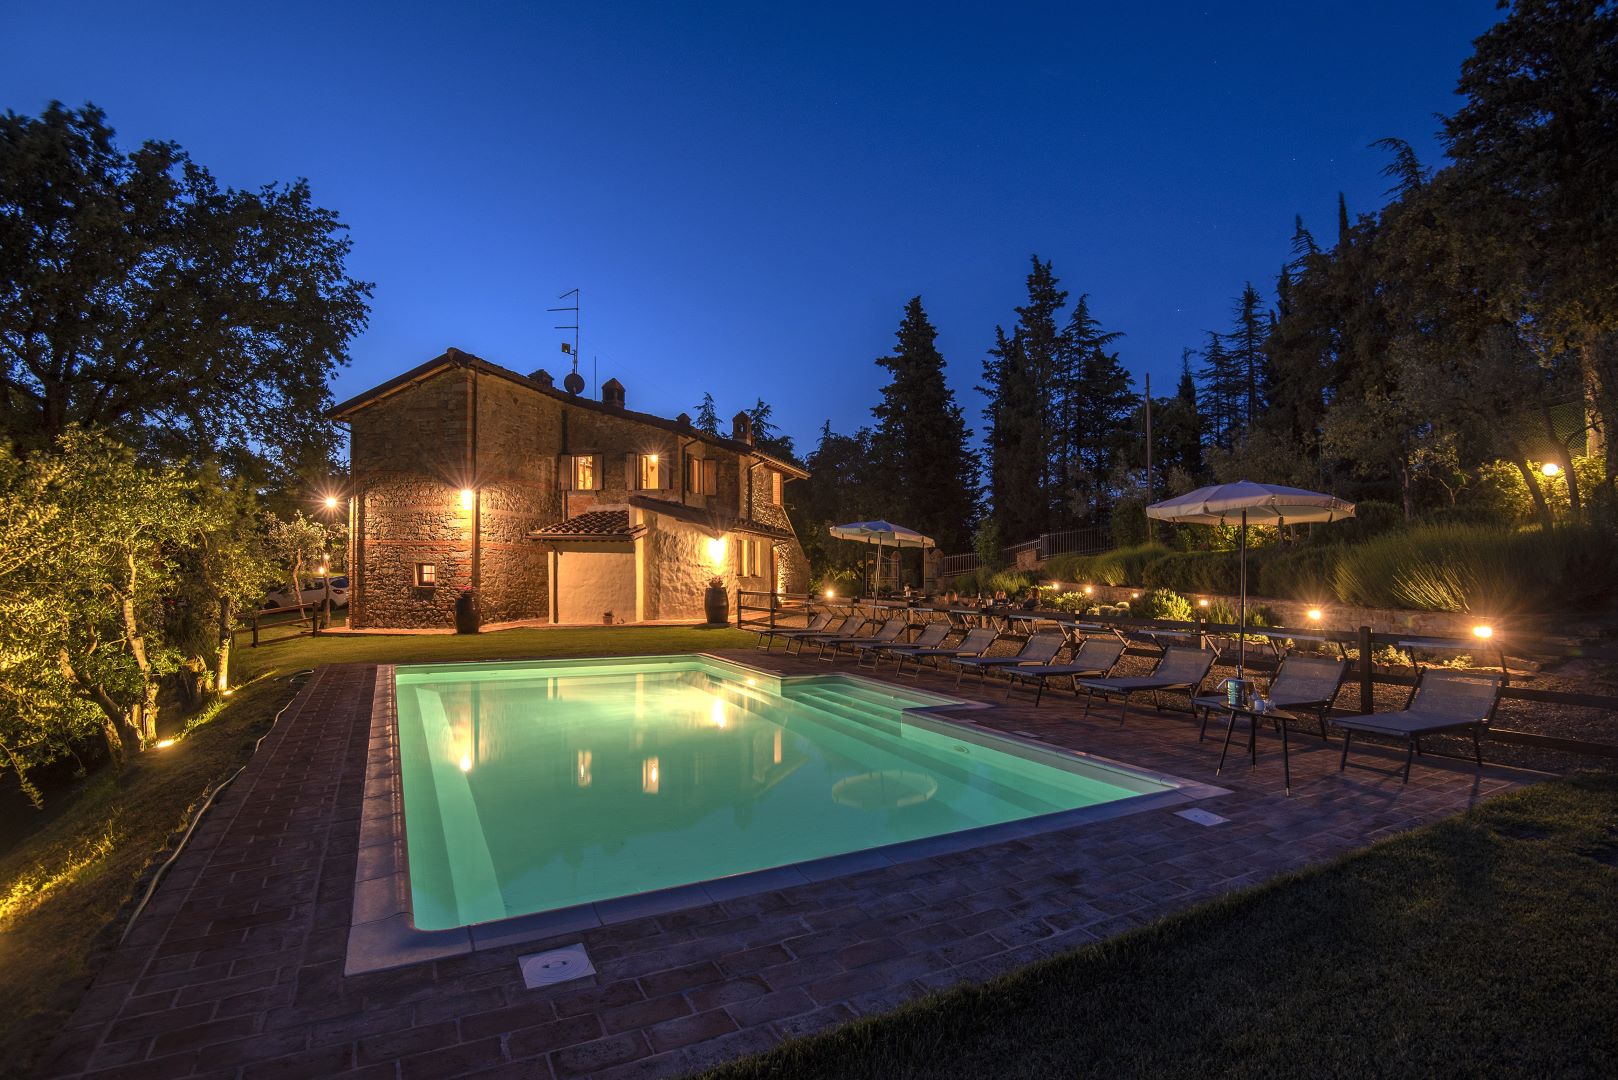 Agriturismo ad Arezzo con Piscina - agritourismus arezzo mit pool - Casa rural en Arezzo con piscina - Country House with a pool